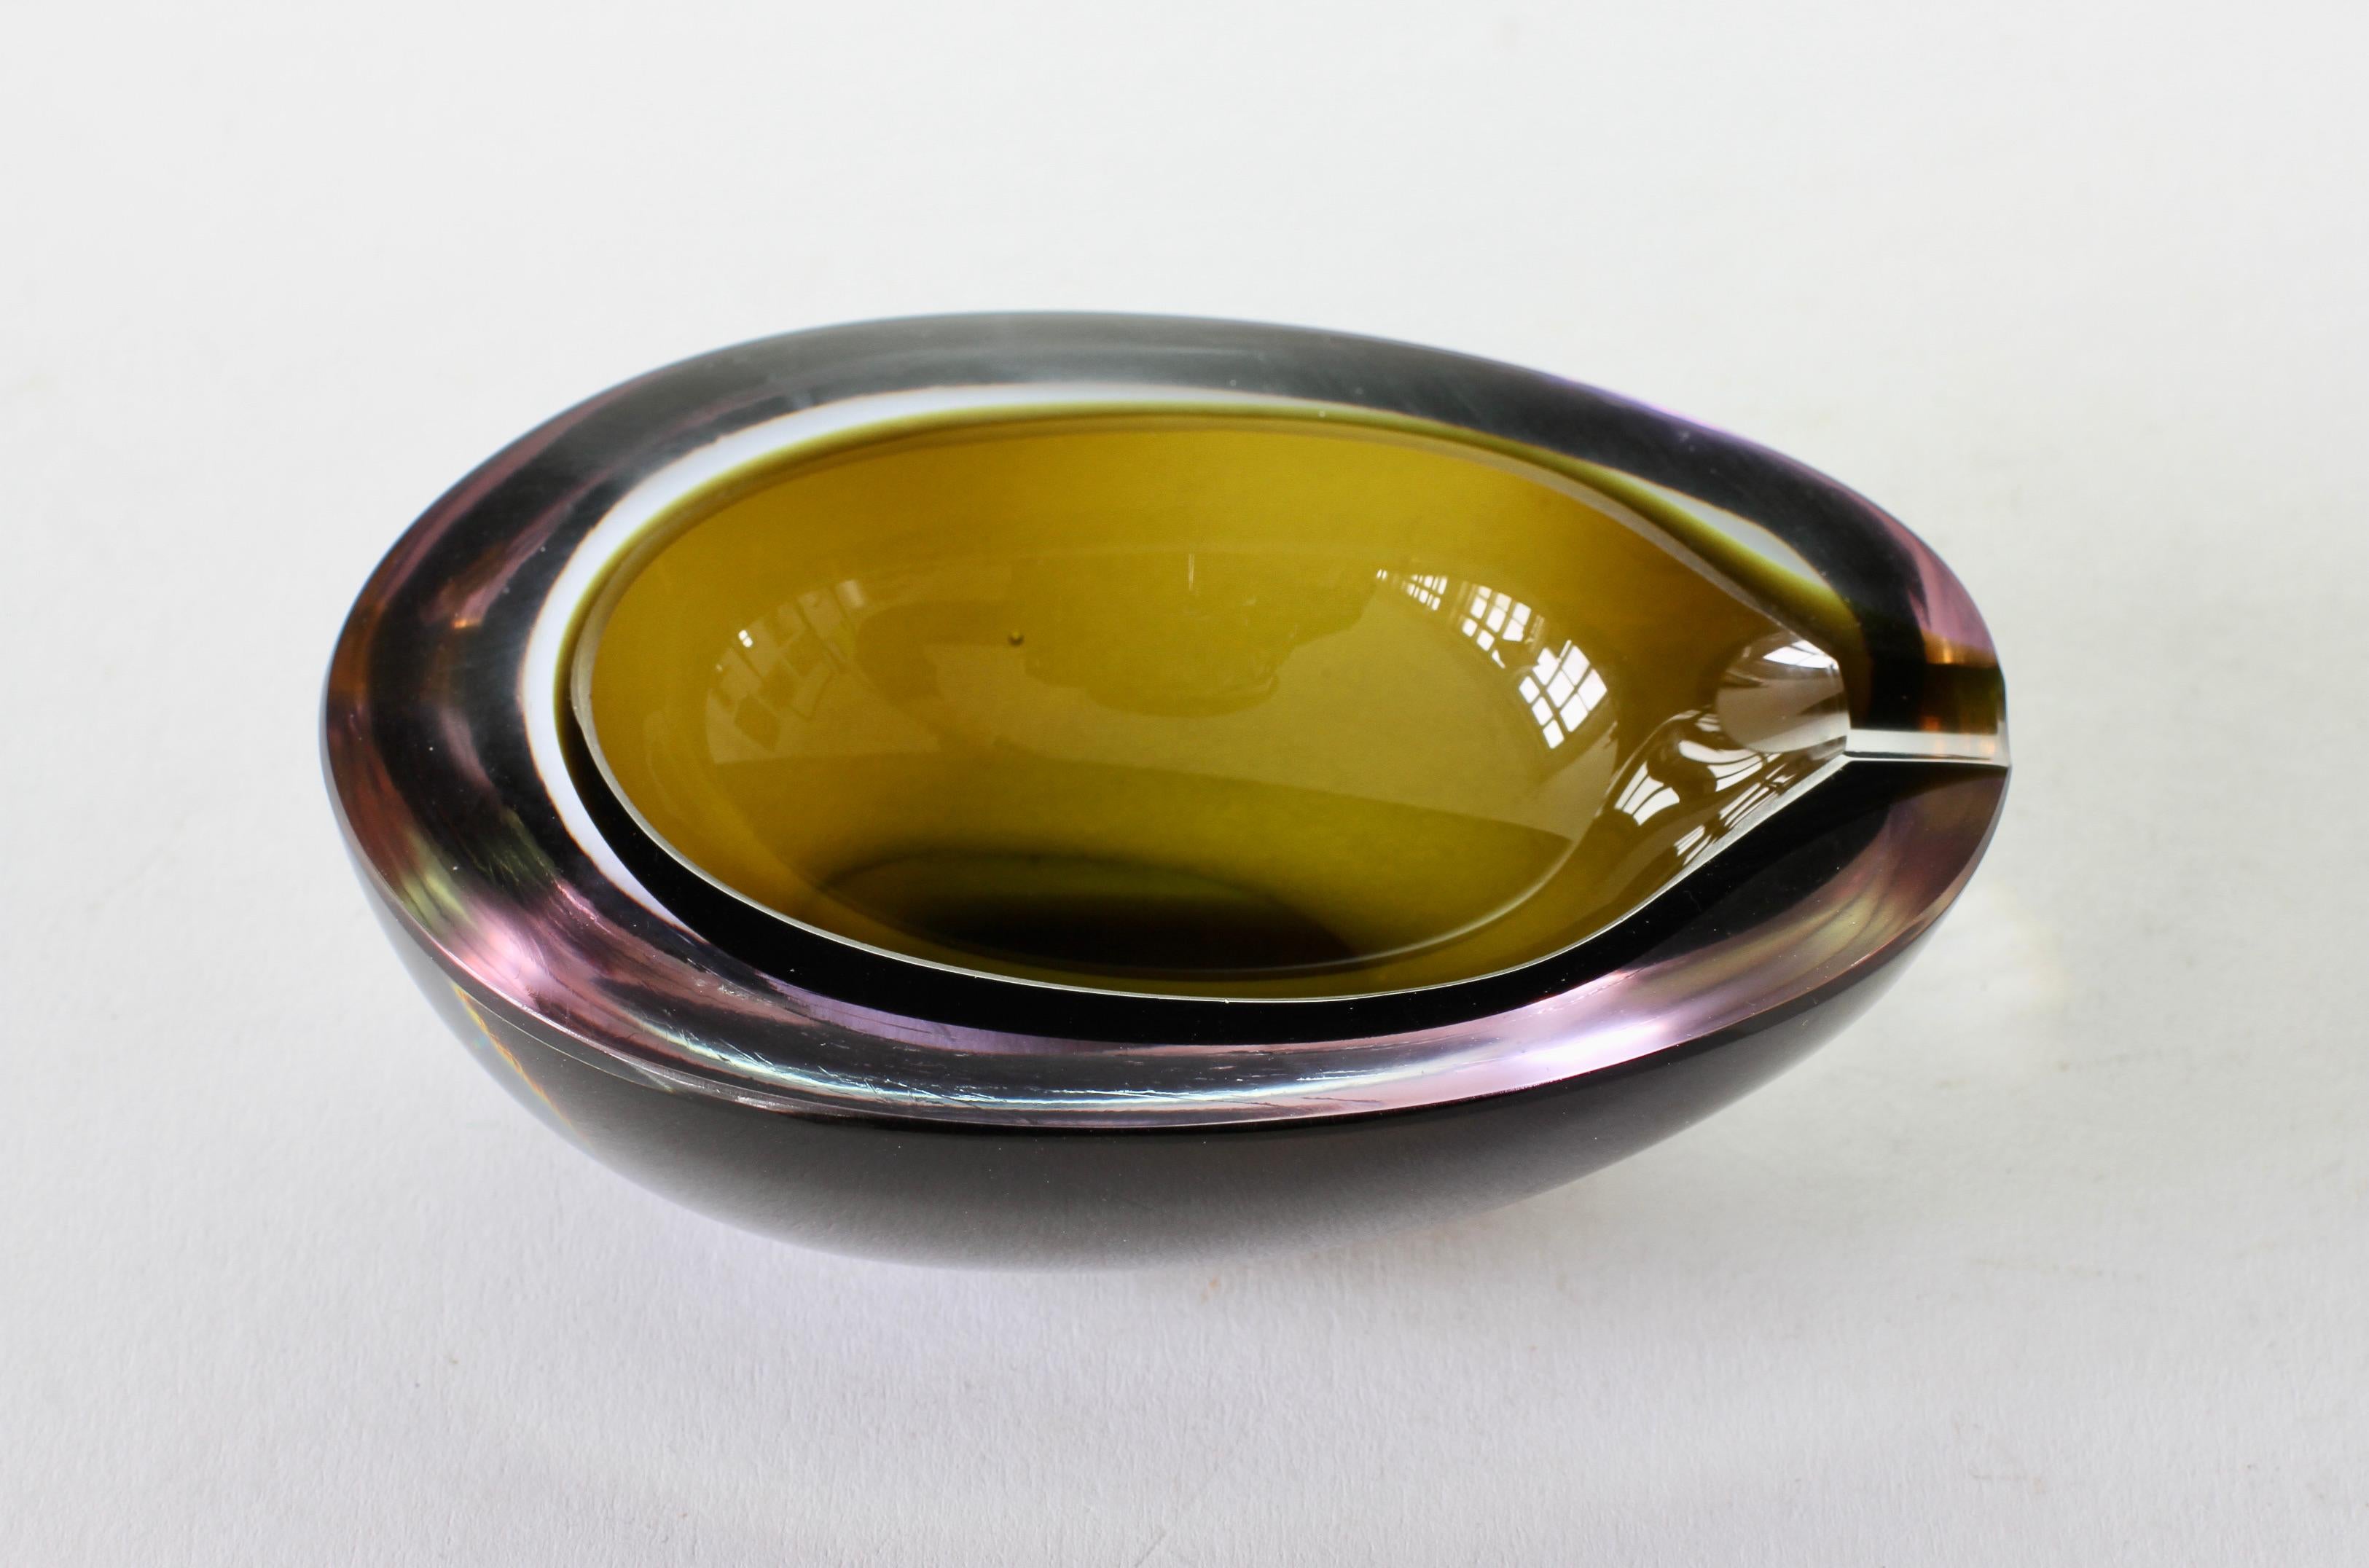 Antonio da Ros (attr.) for Cenedese vintage Mid-Century Modern Italian Murano glass ashtray, circa 1965-1975. Utilizing the Sommerso technique this petite piece of glass features an asymmetric design of green and lilac / purple / alexandrite toned